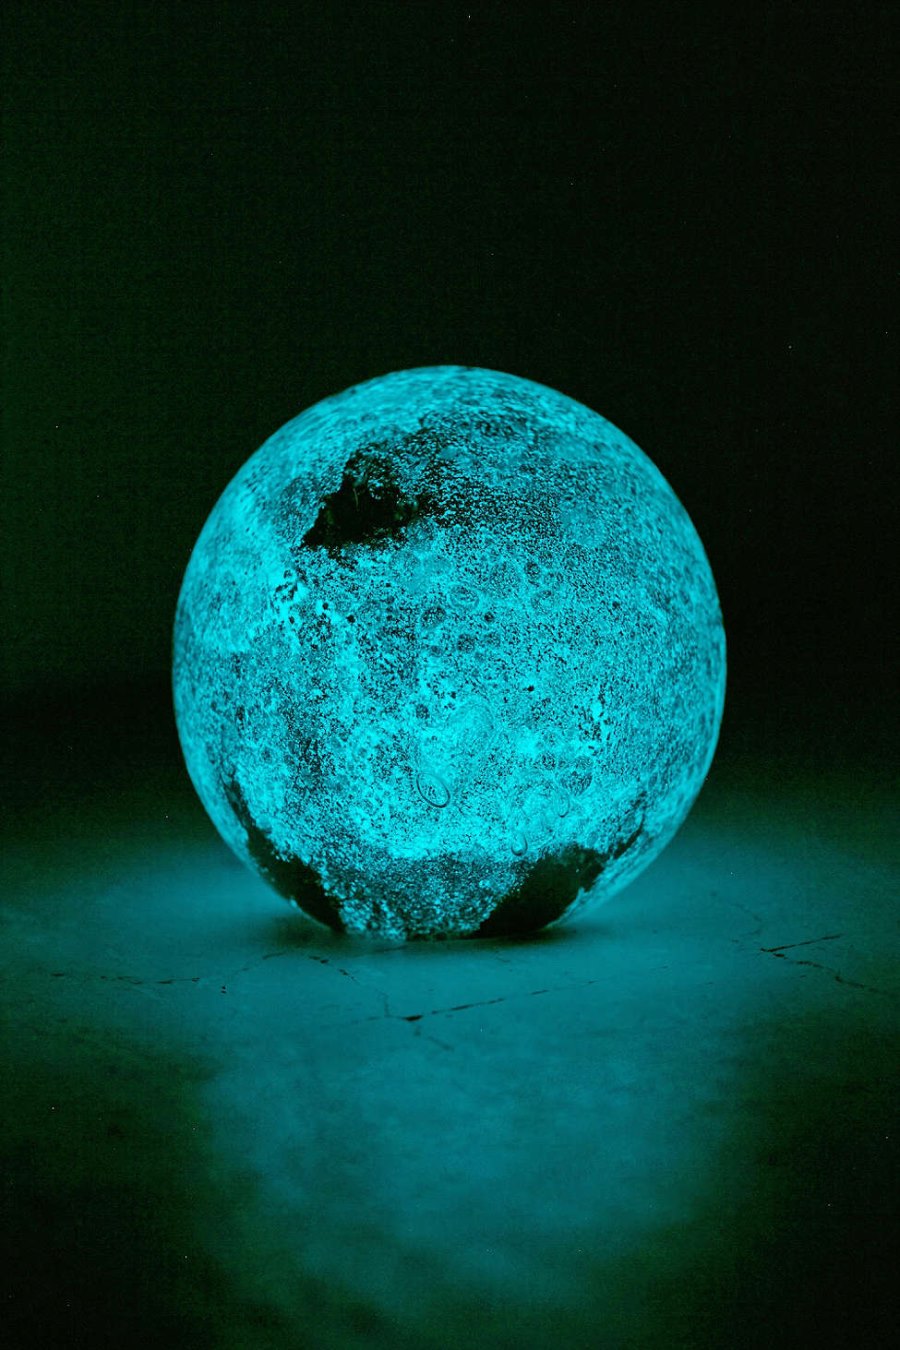 Glow-in-the-dark glass moon from Urban Outfitters